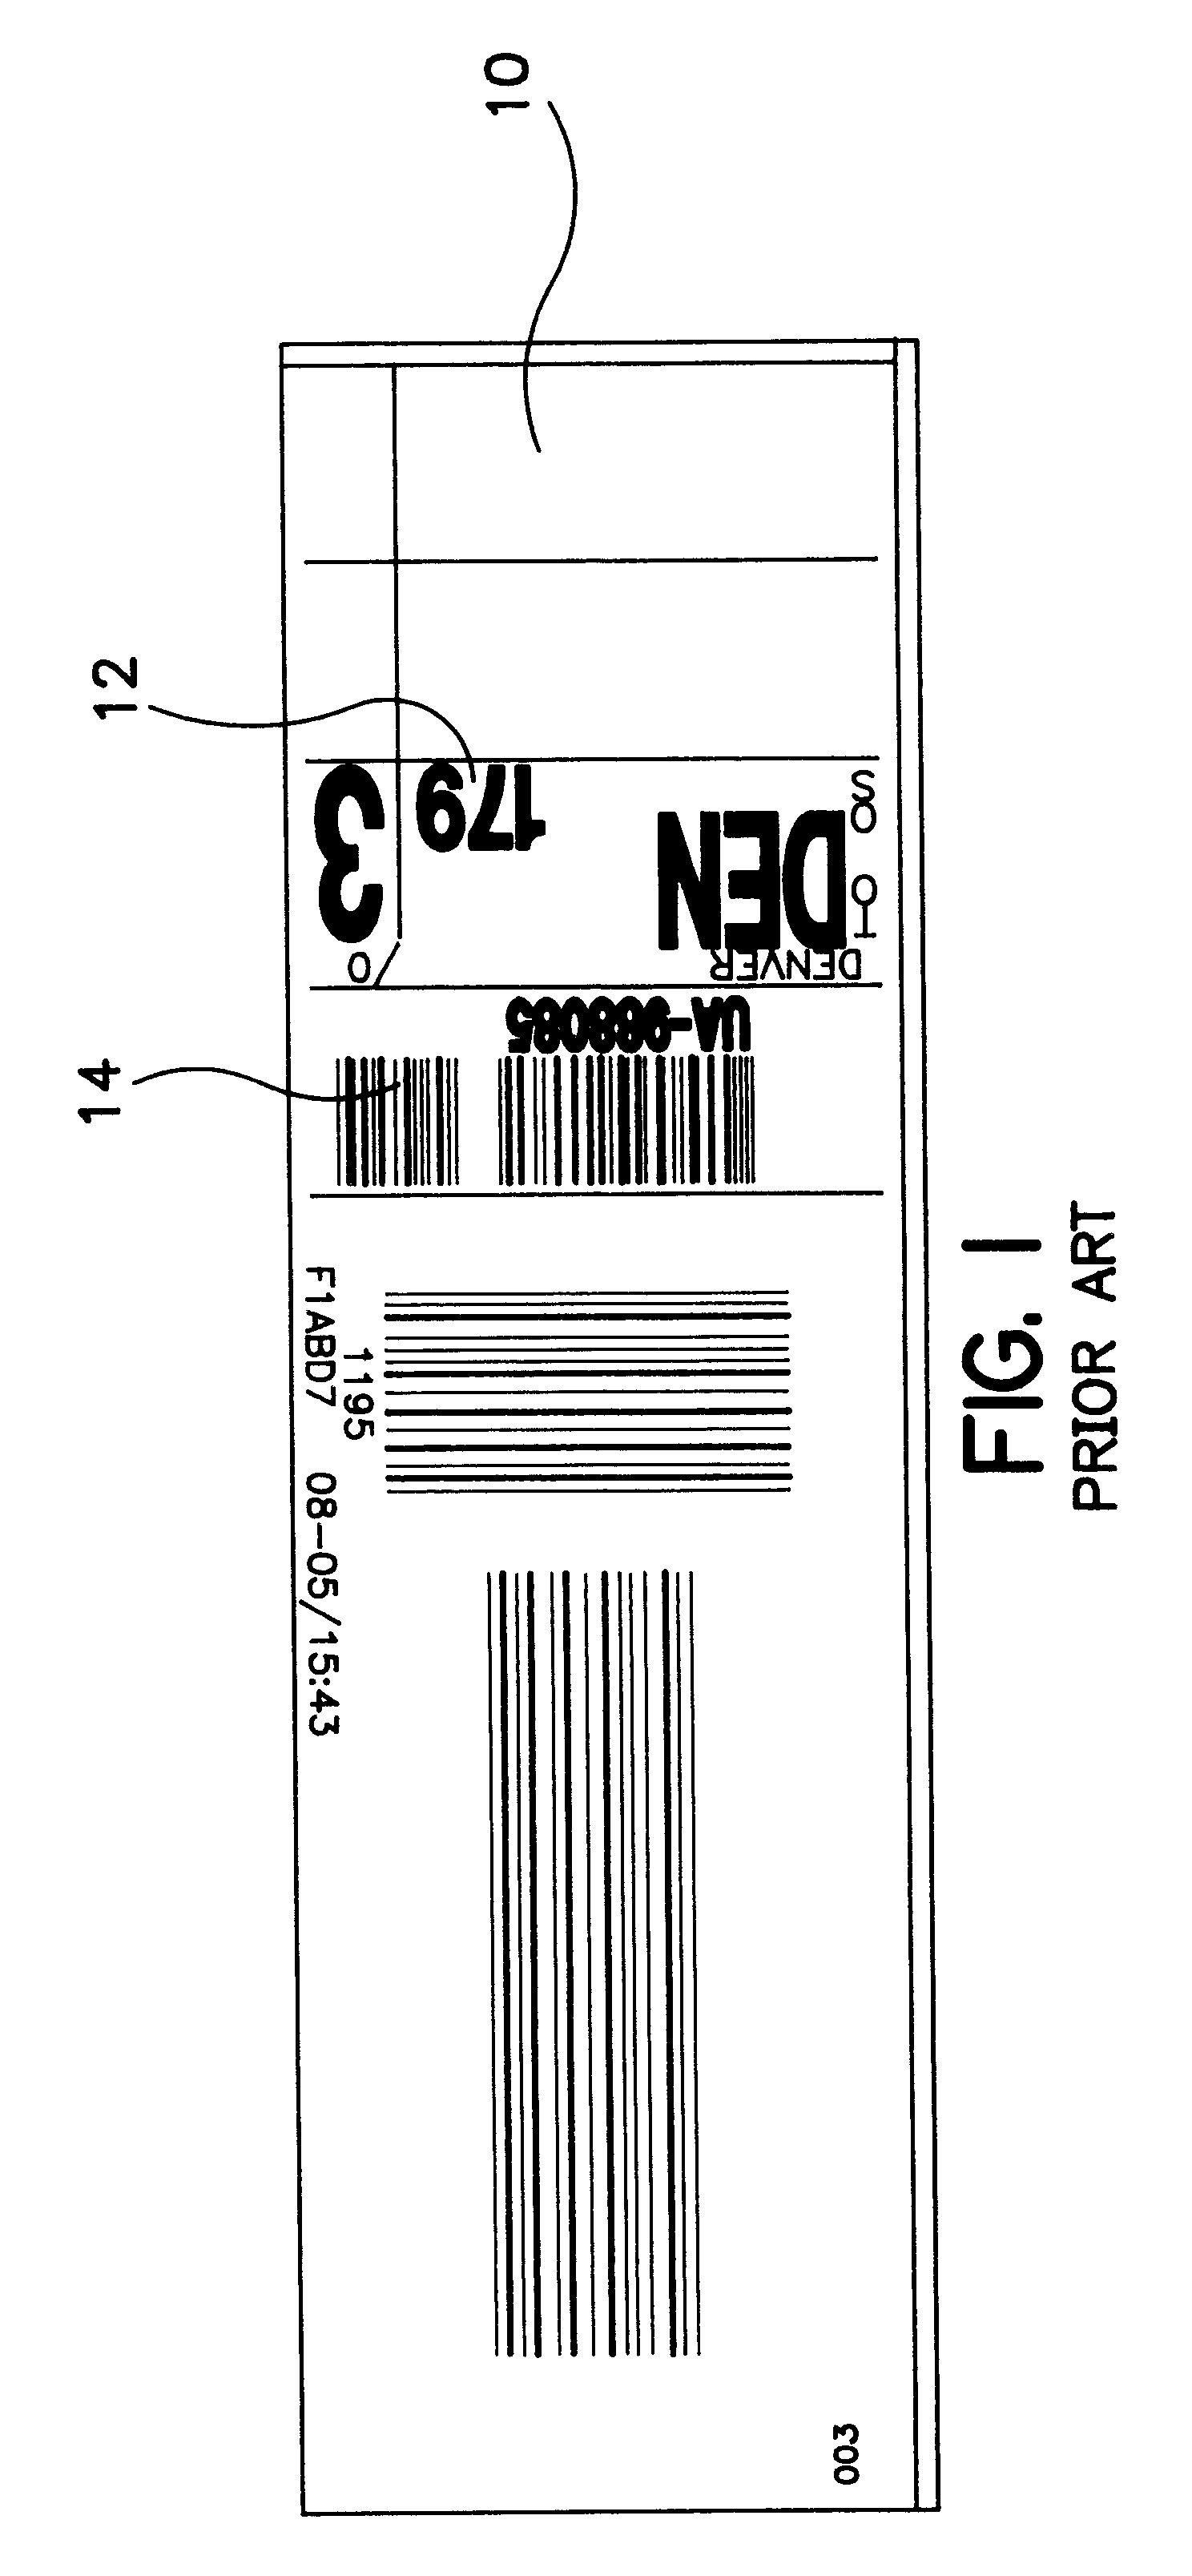 Electronic identification tag